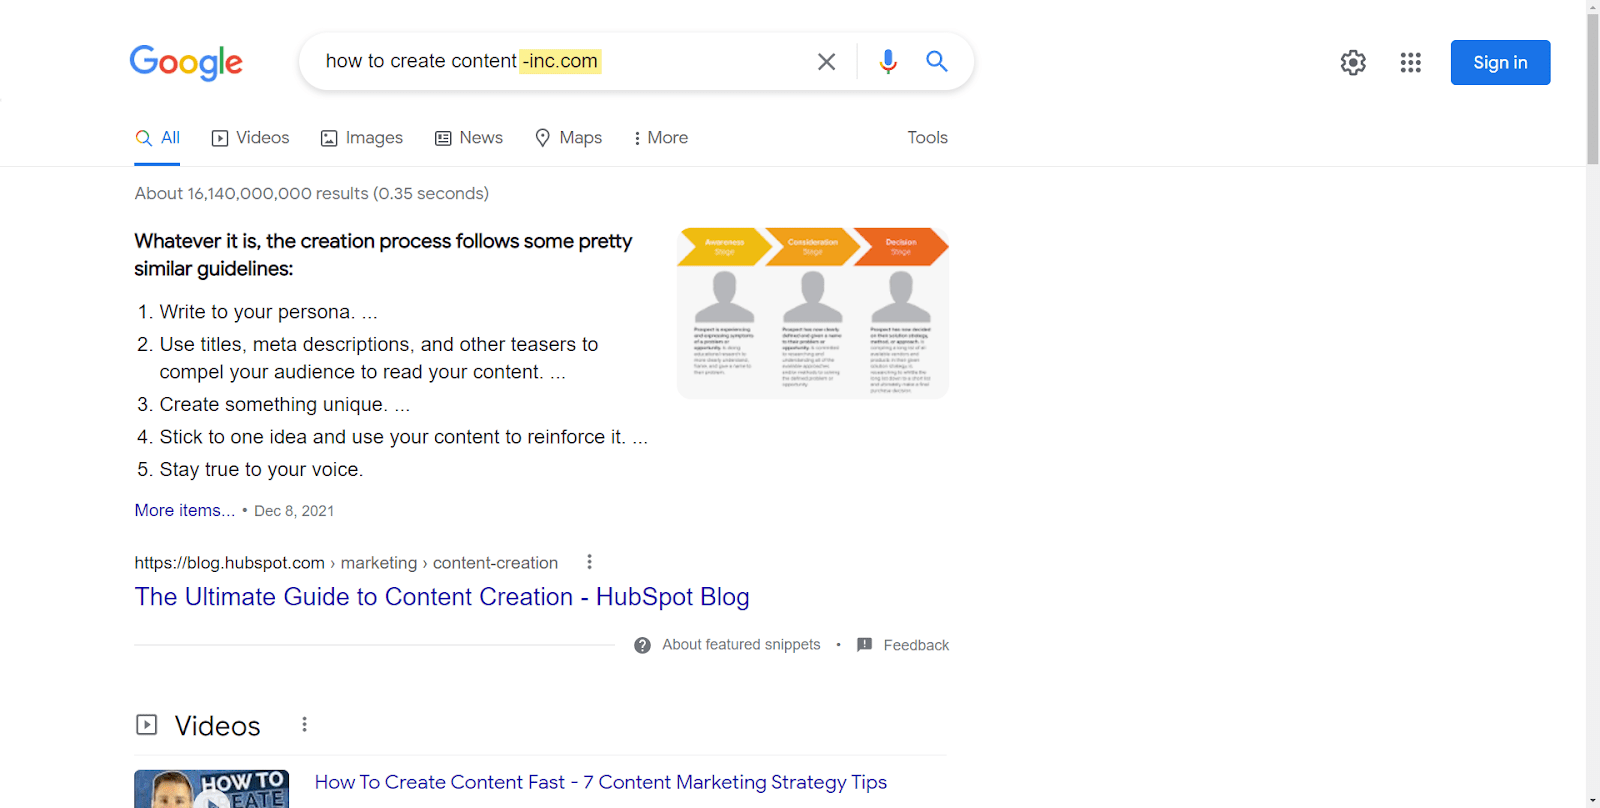 Search for "how to create content -inc.com" shows additional featured snippets